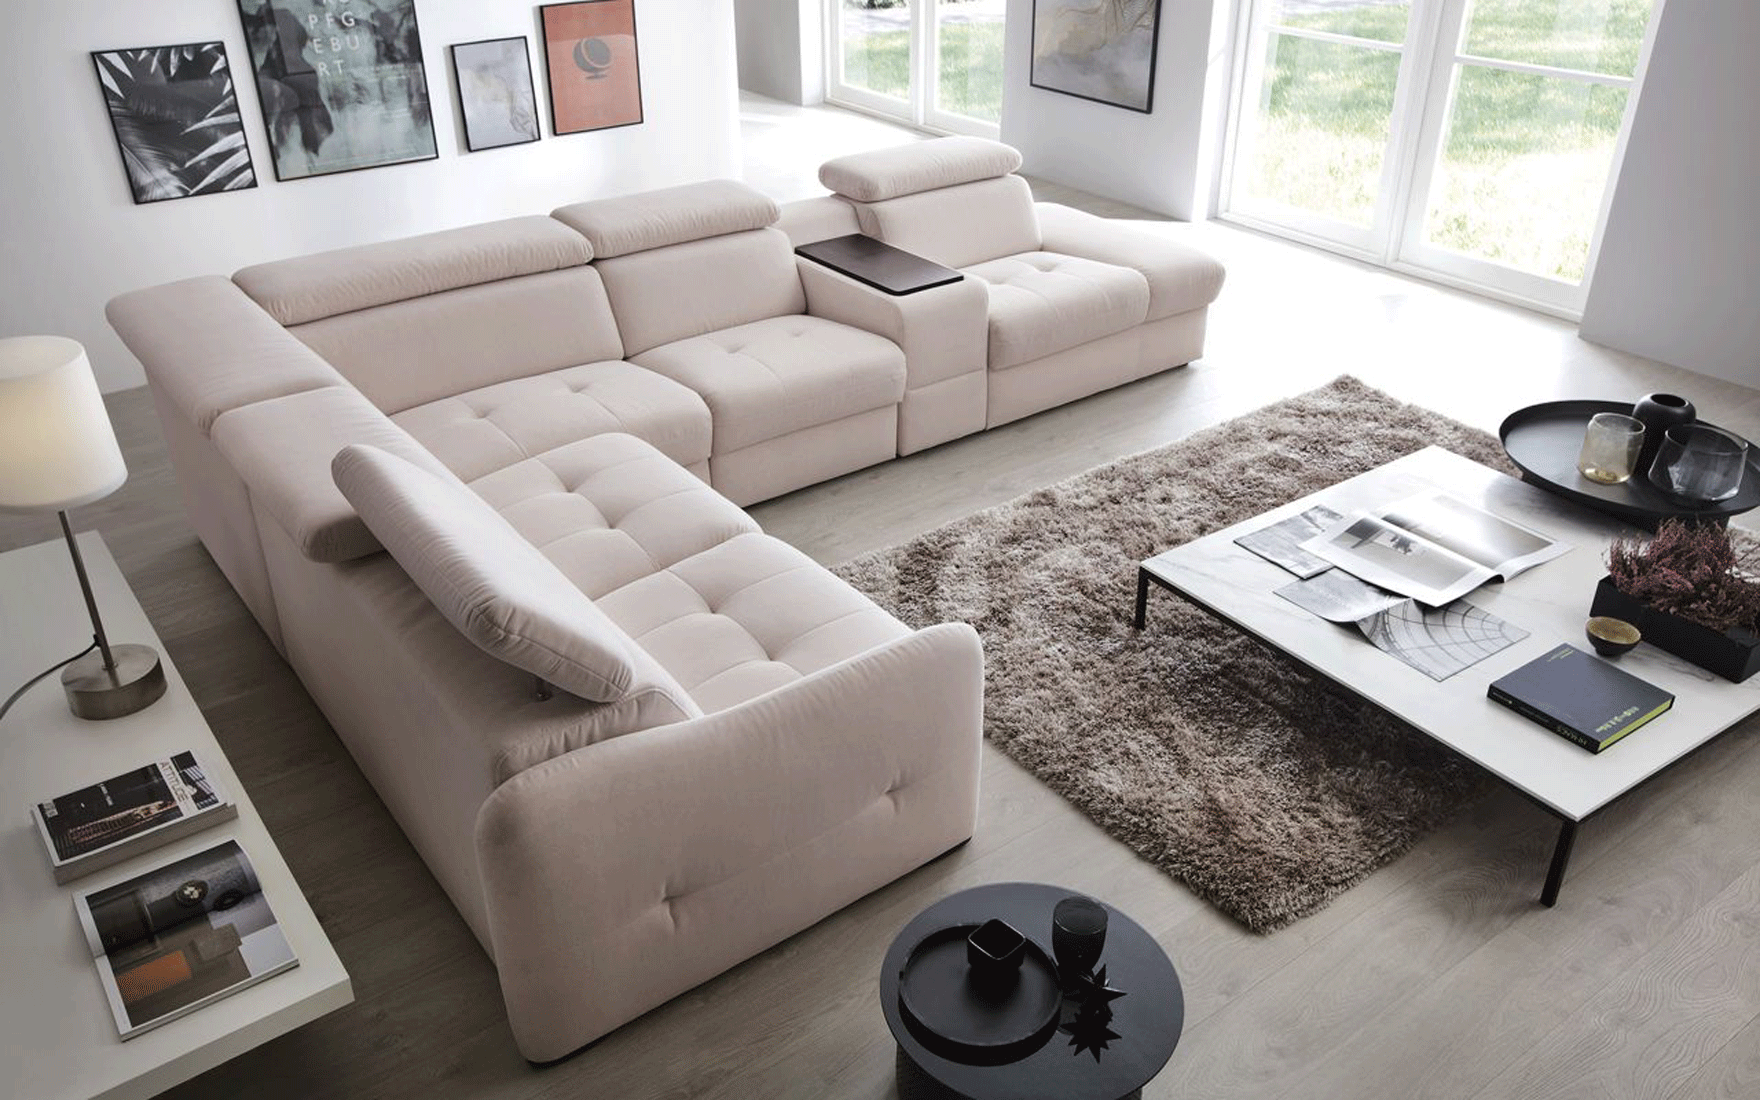 Living Room Furniture Sofas Loveseats and Chairs Domani Sectional w/Recliner, storage